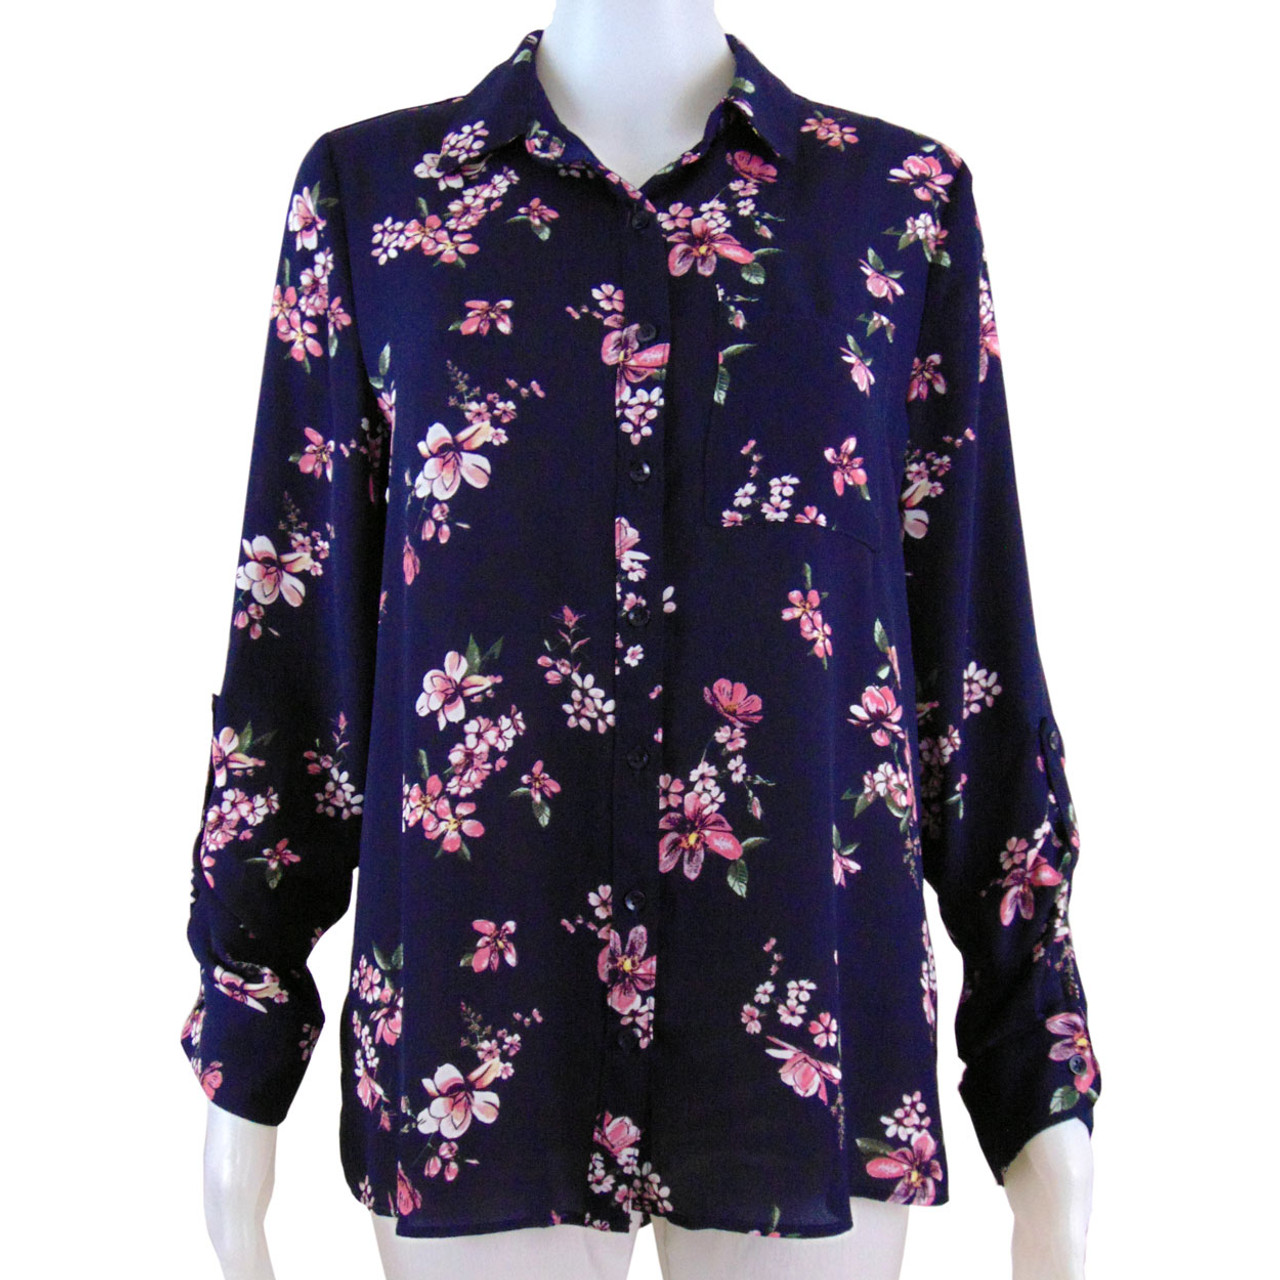 https://cdn11.bigcommerce.com/s-pm7ms50omk/images/stencil/1280x1280/products/2239/12968/reitmans-floral-long-sleeve-blouse__01079.1600712141.jpg?c=2